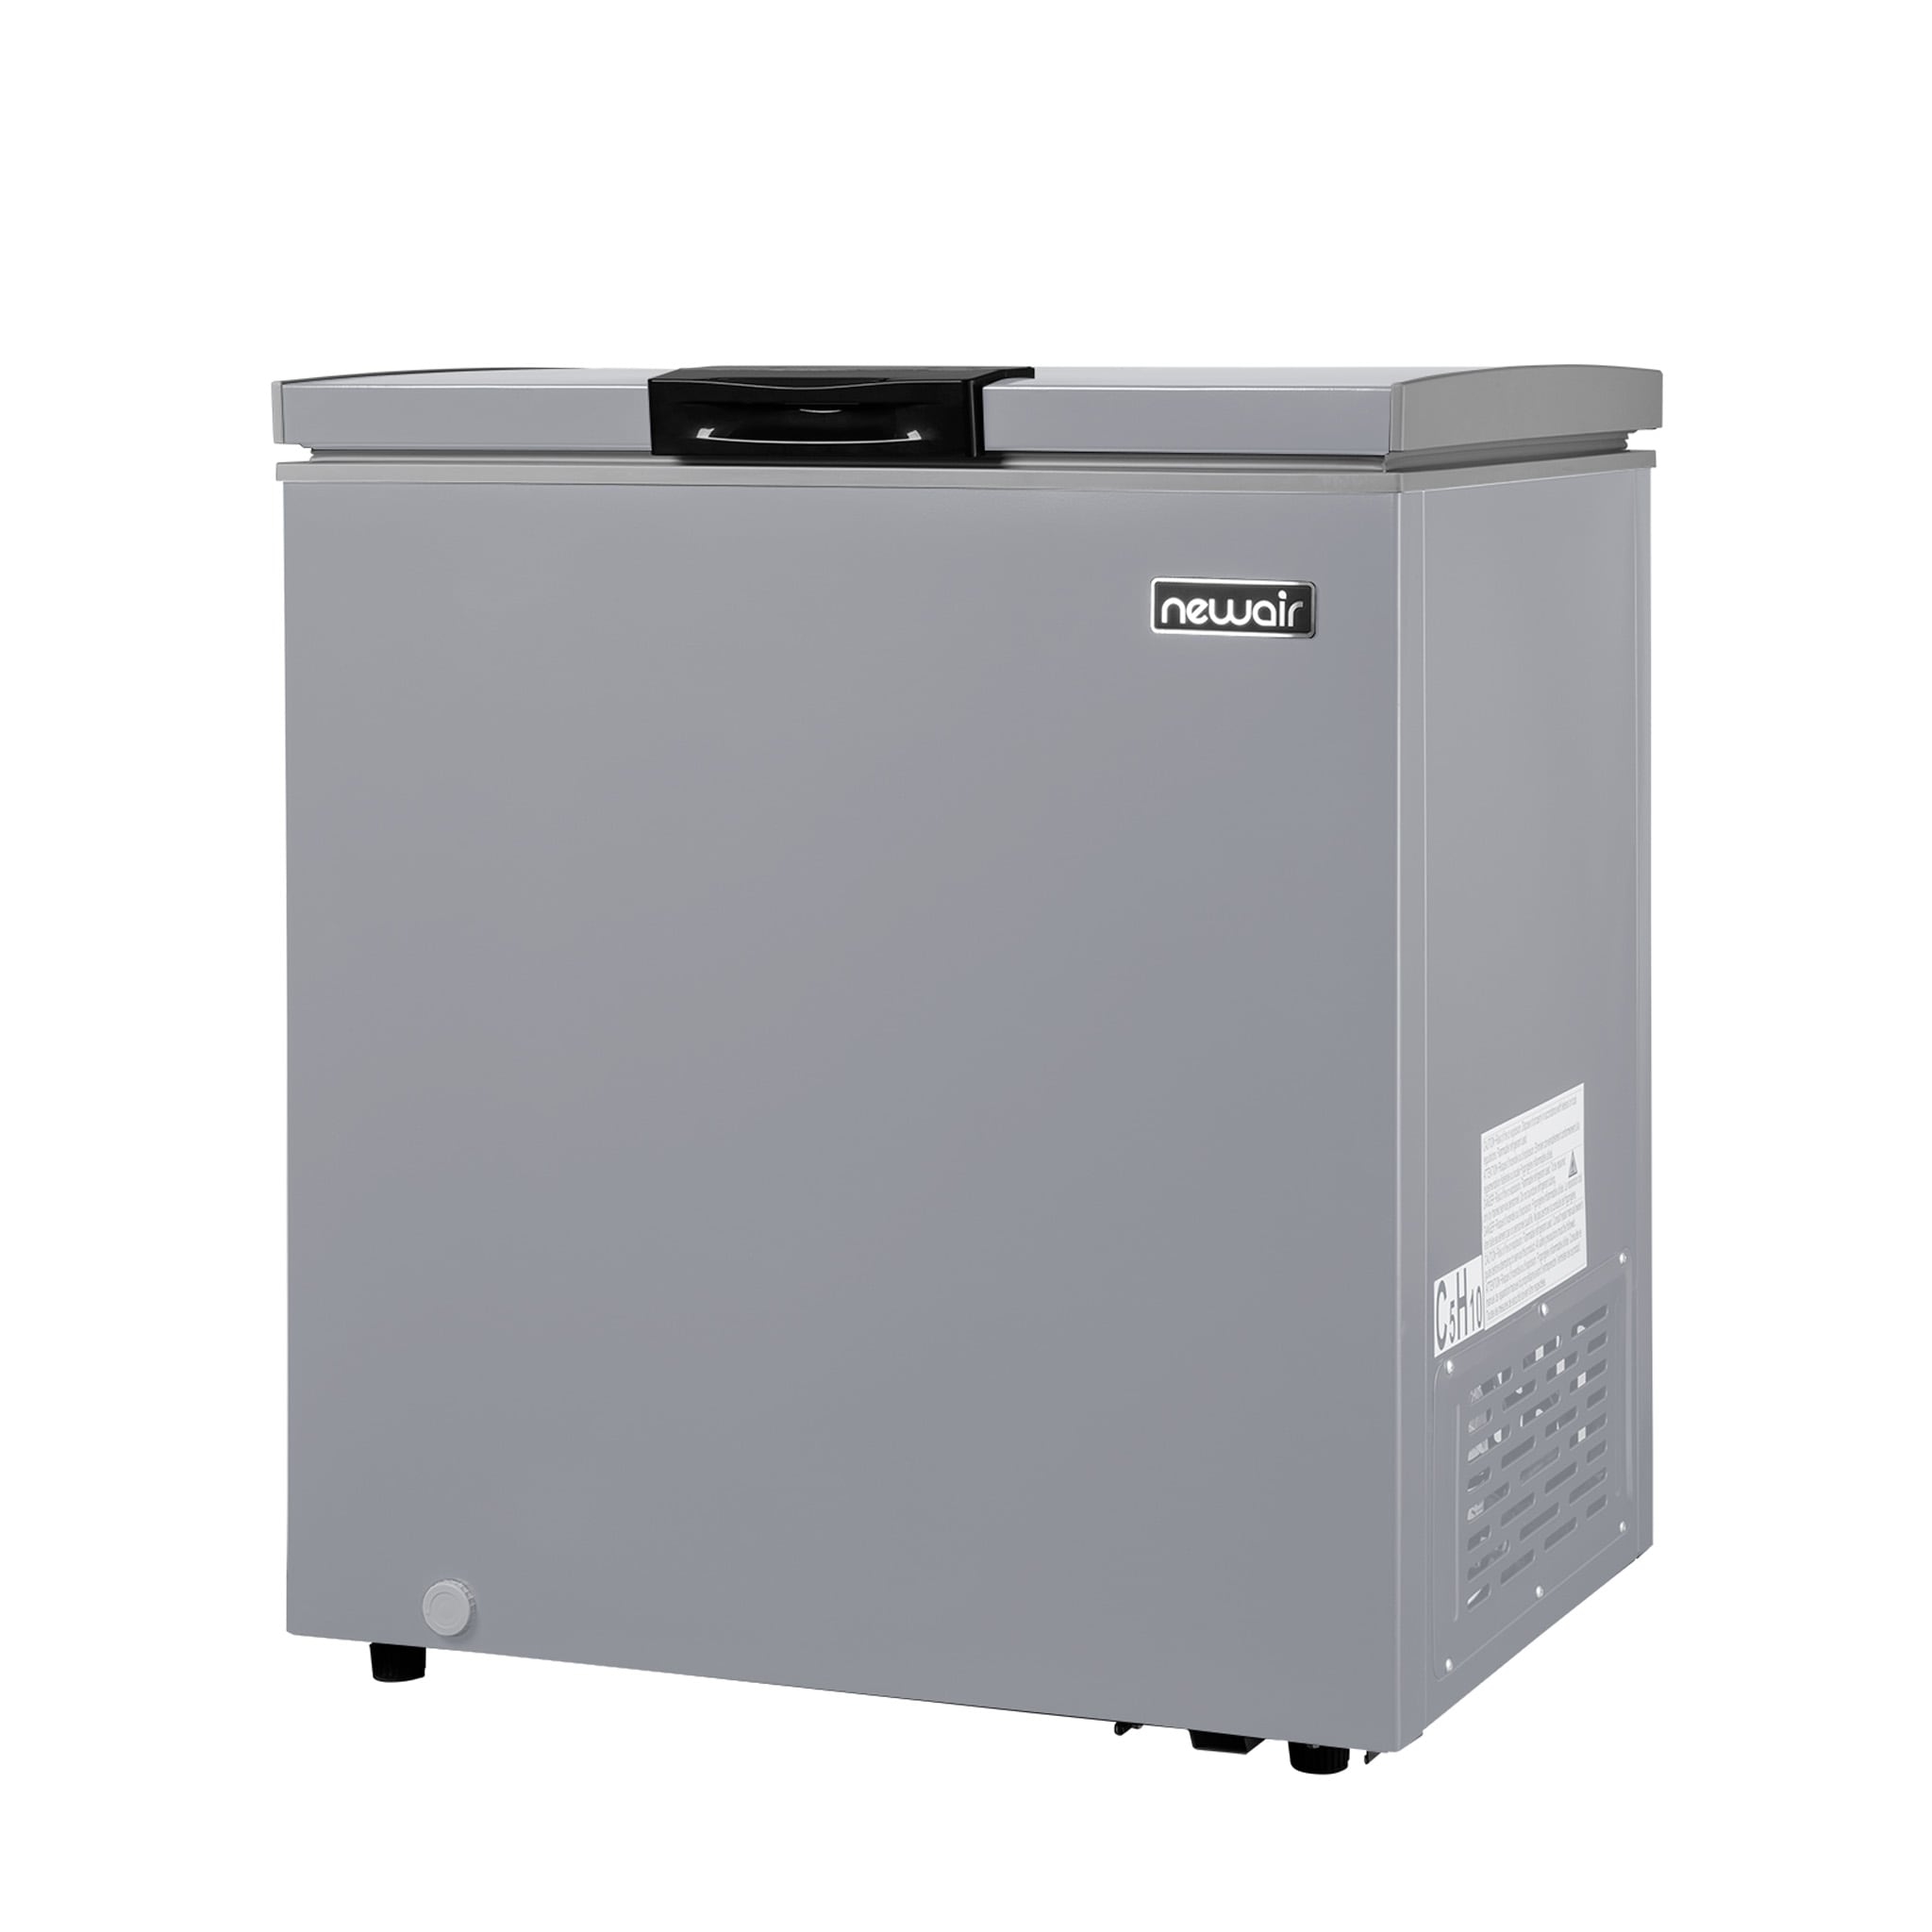 Maytag Brand Introduces New Chest Freezer that is Garage Ready in Freezer  Mode